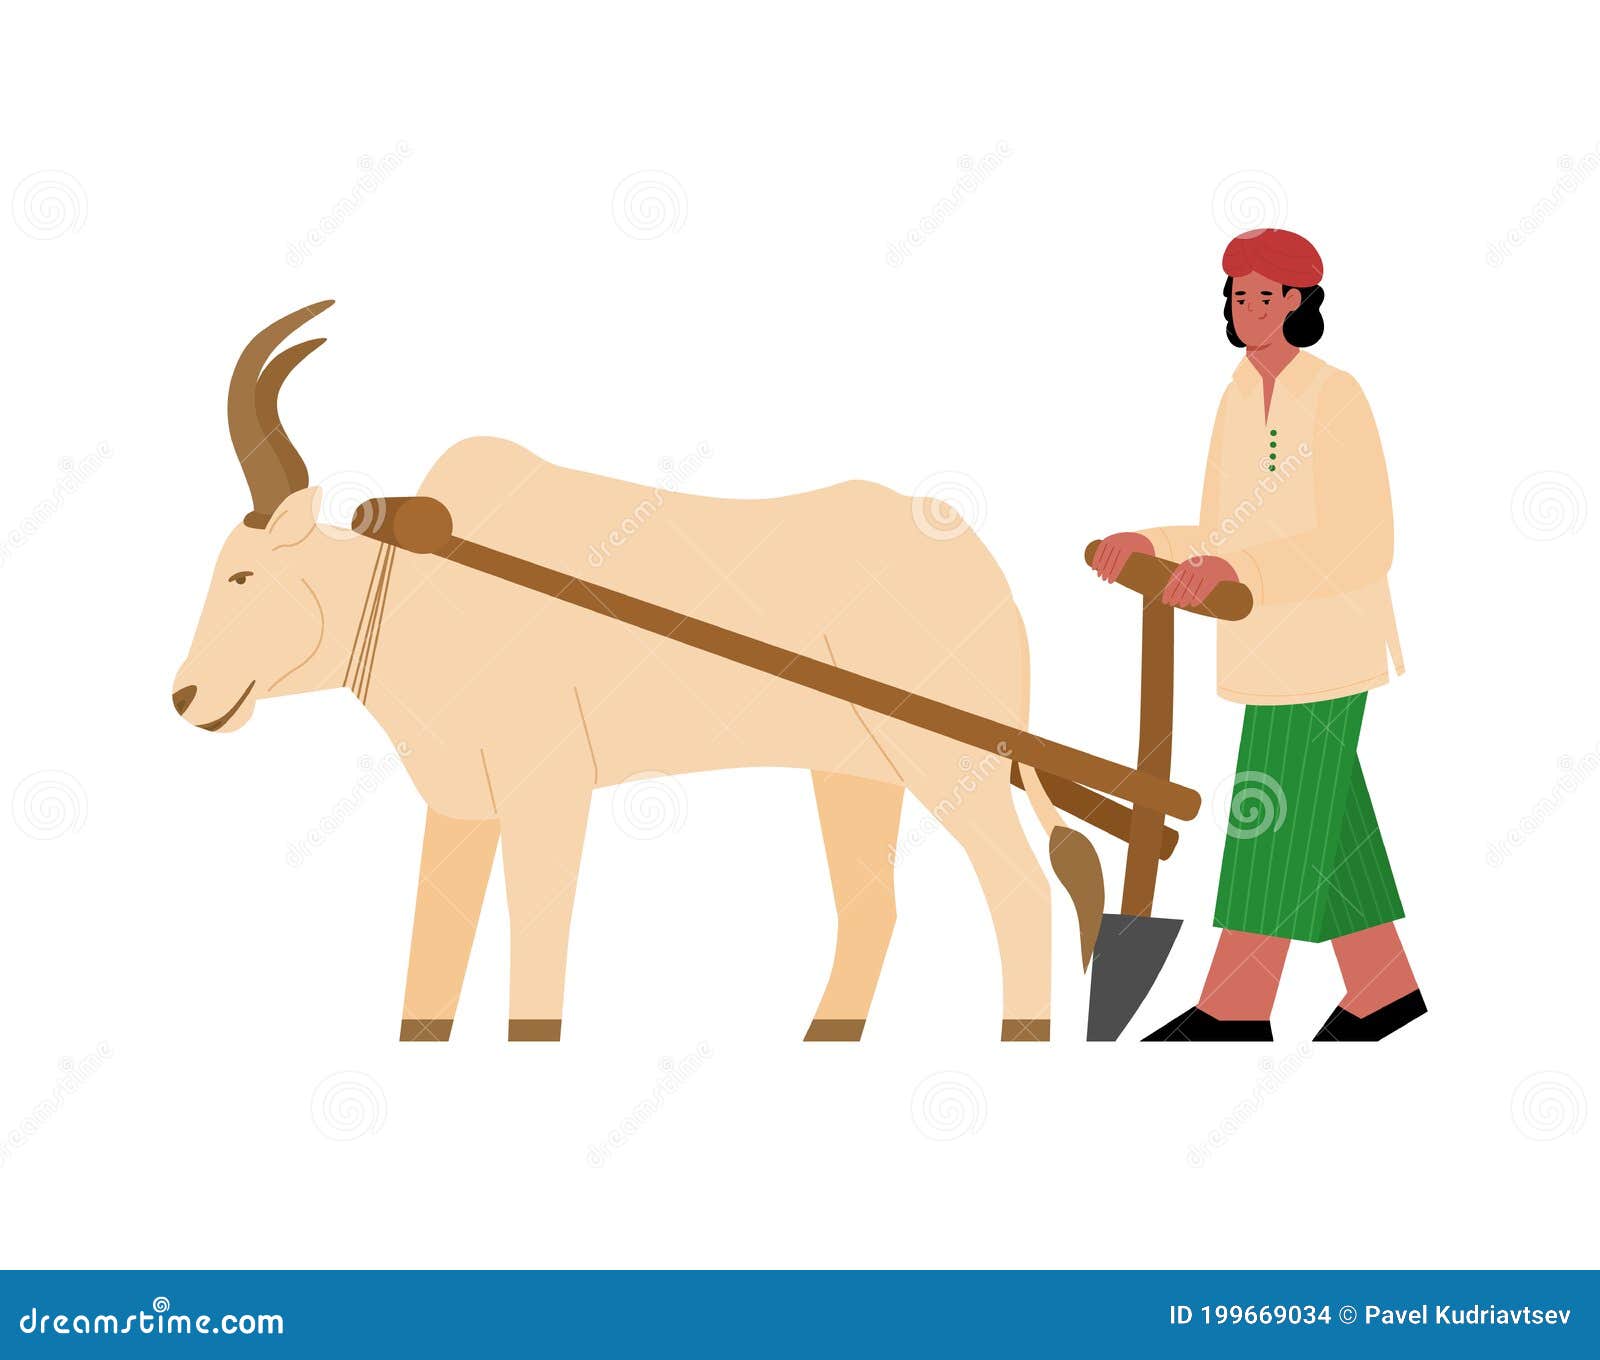 Vector Illustration with Indian Farmer Plowing Field and Harnessed ...